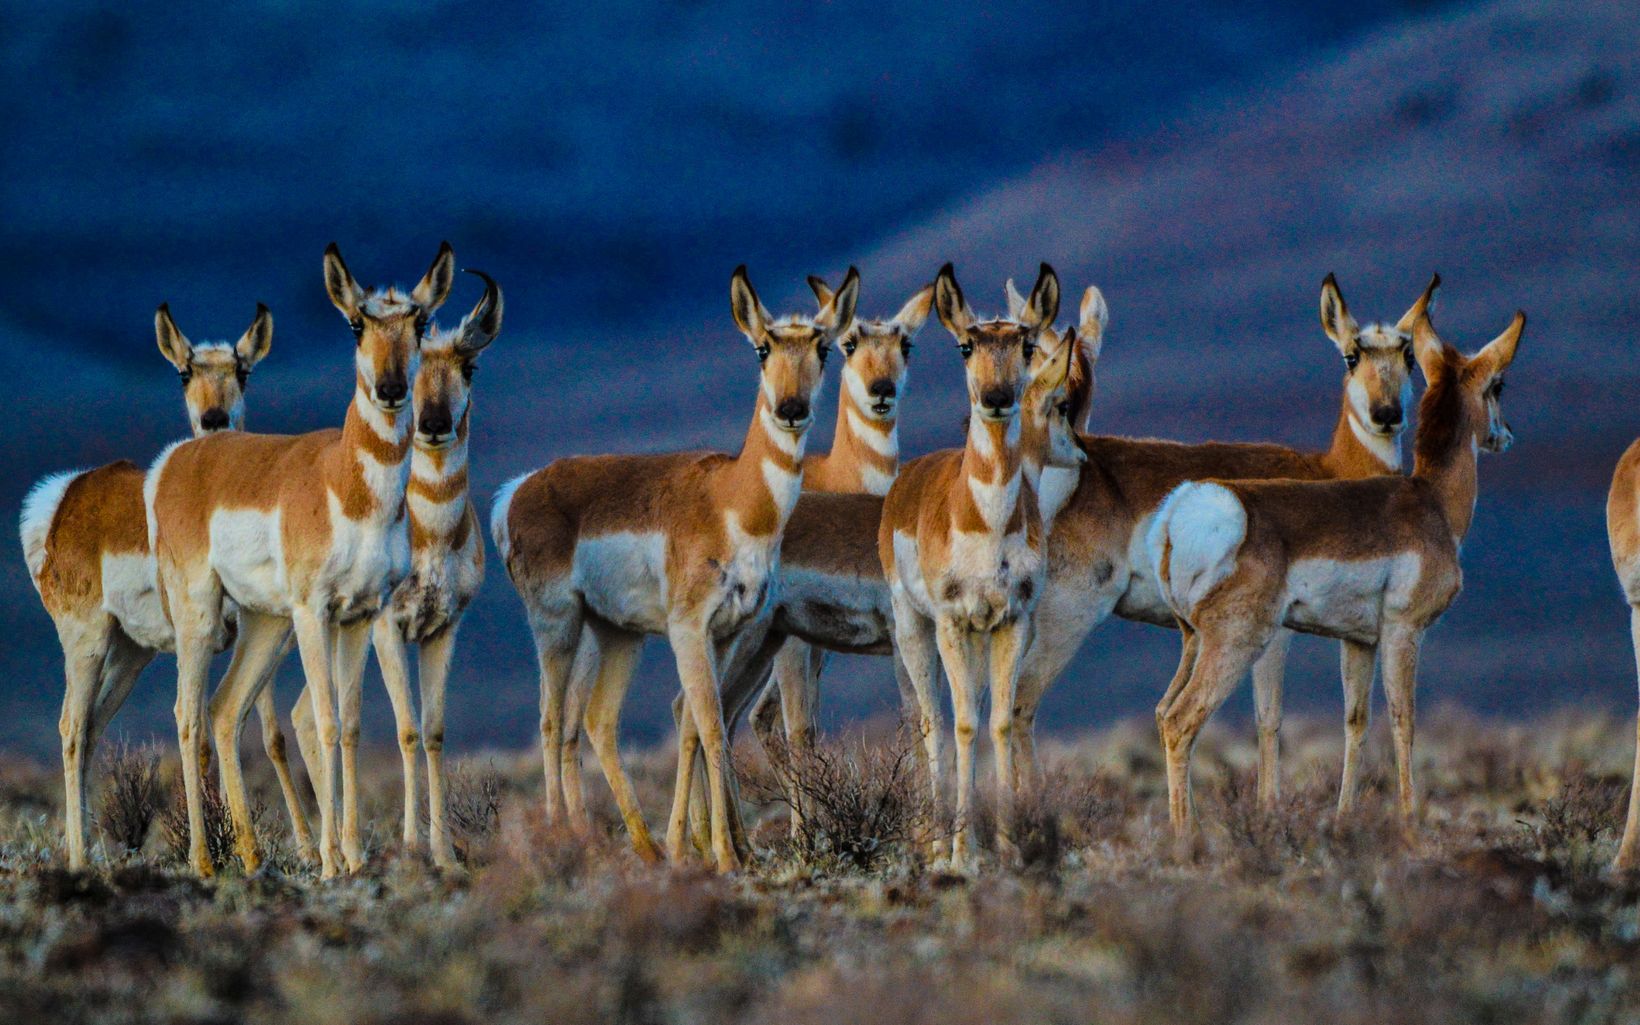 A group of pronghorn antelope looking at the camera.